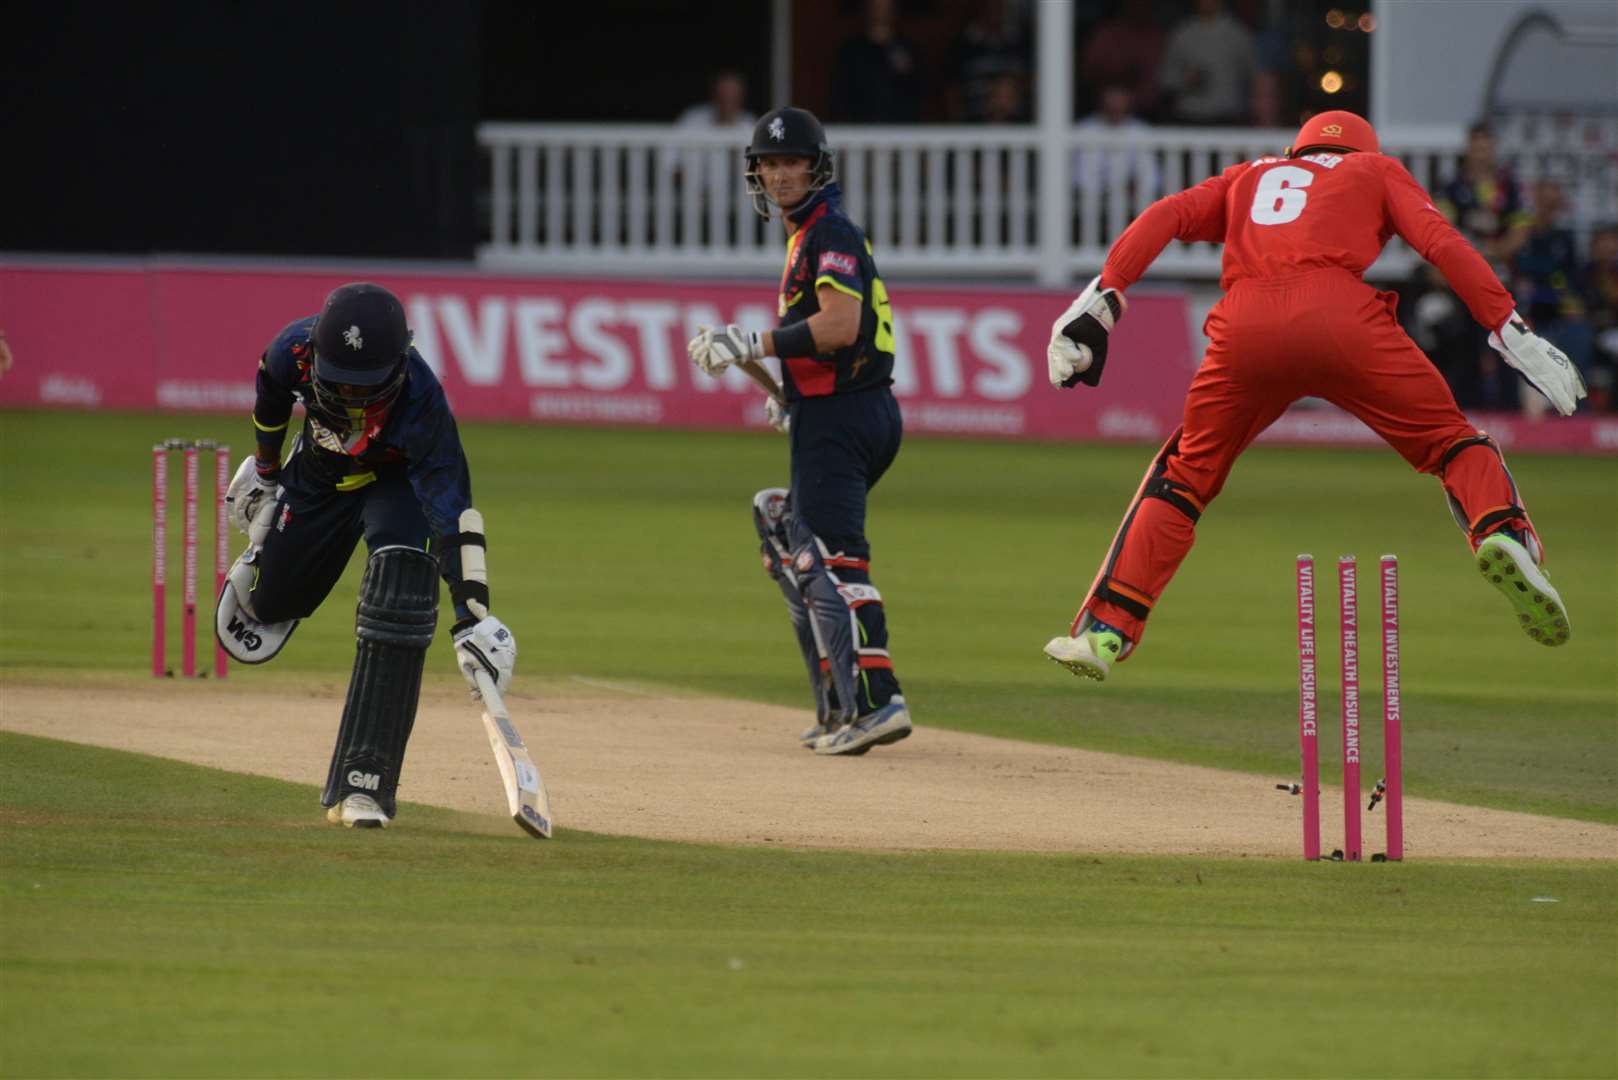 Daniel Bell-Drummond is run out at the start of Kent's innings during the Vitality Blast T20 match with Lancashire at the St Lawrence Ground. Picture: Chris Davey (3774605)